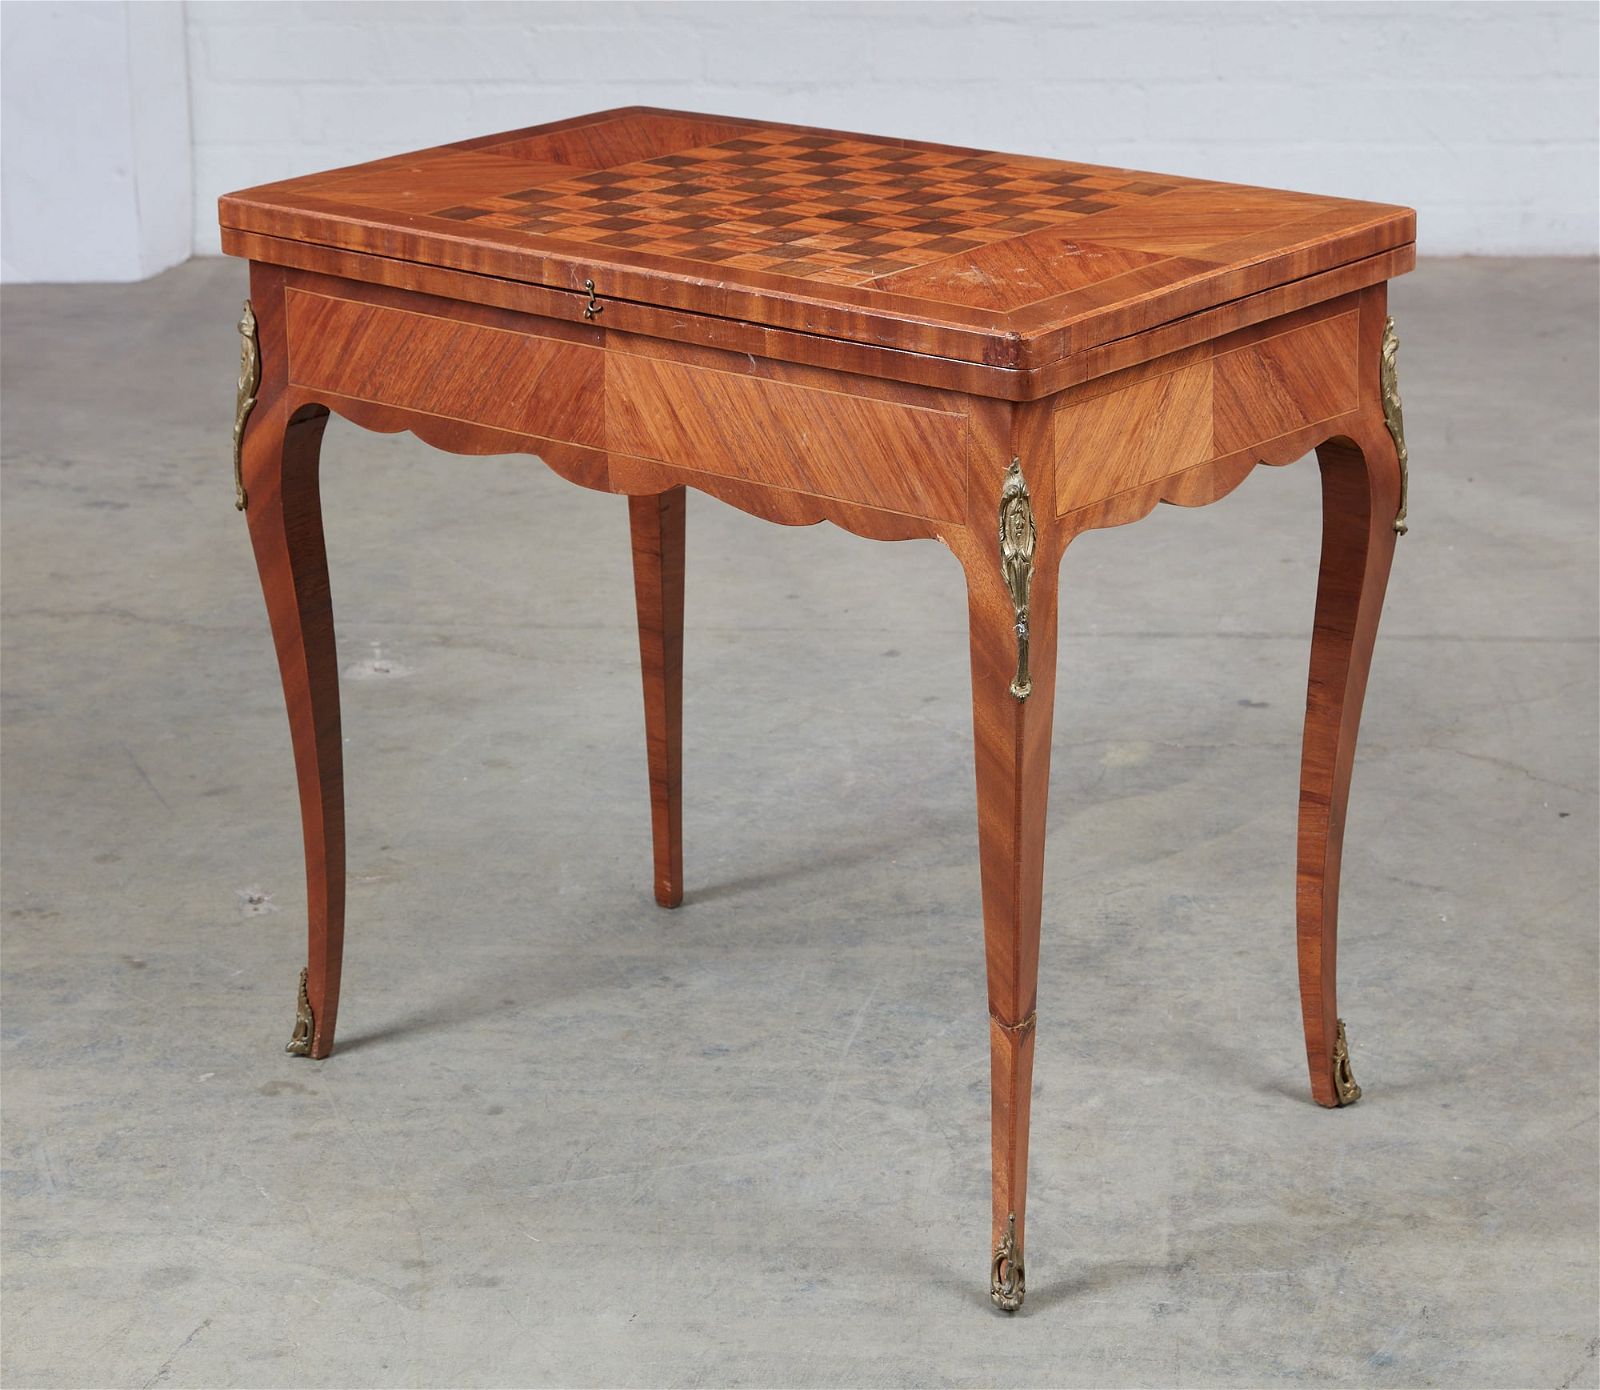 A LOUIS XV STYLE INLAID FOLD TOP